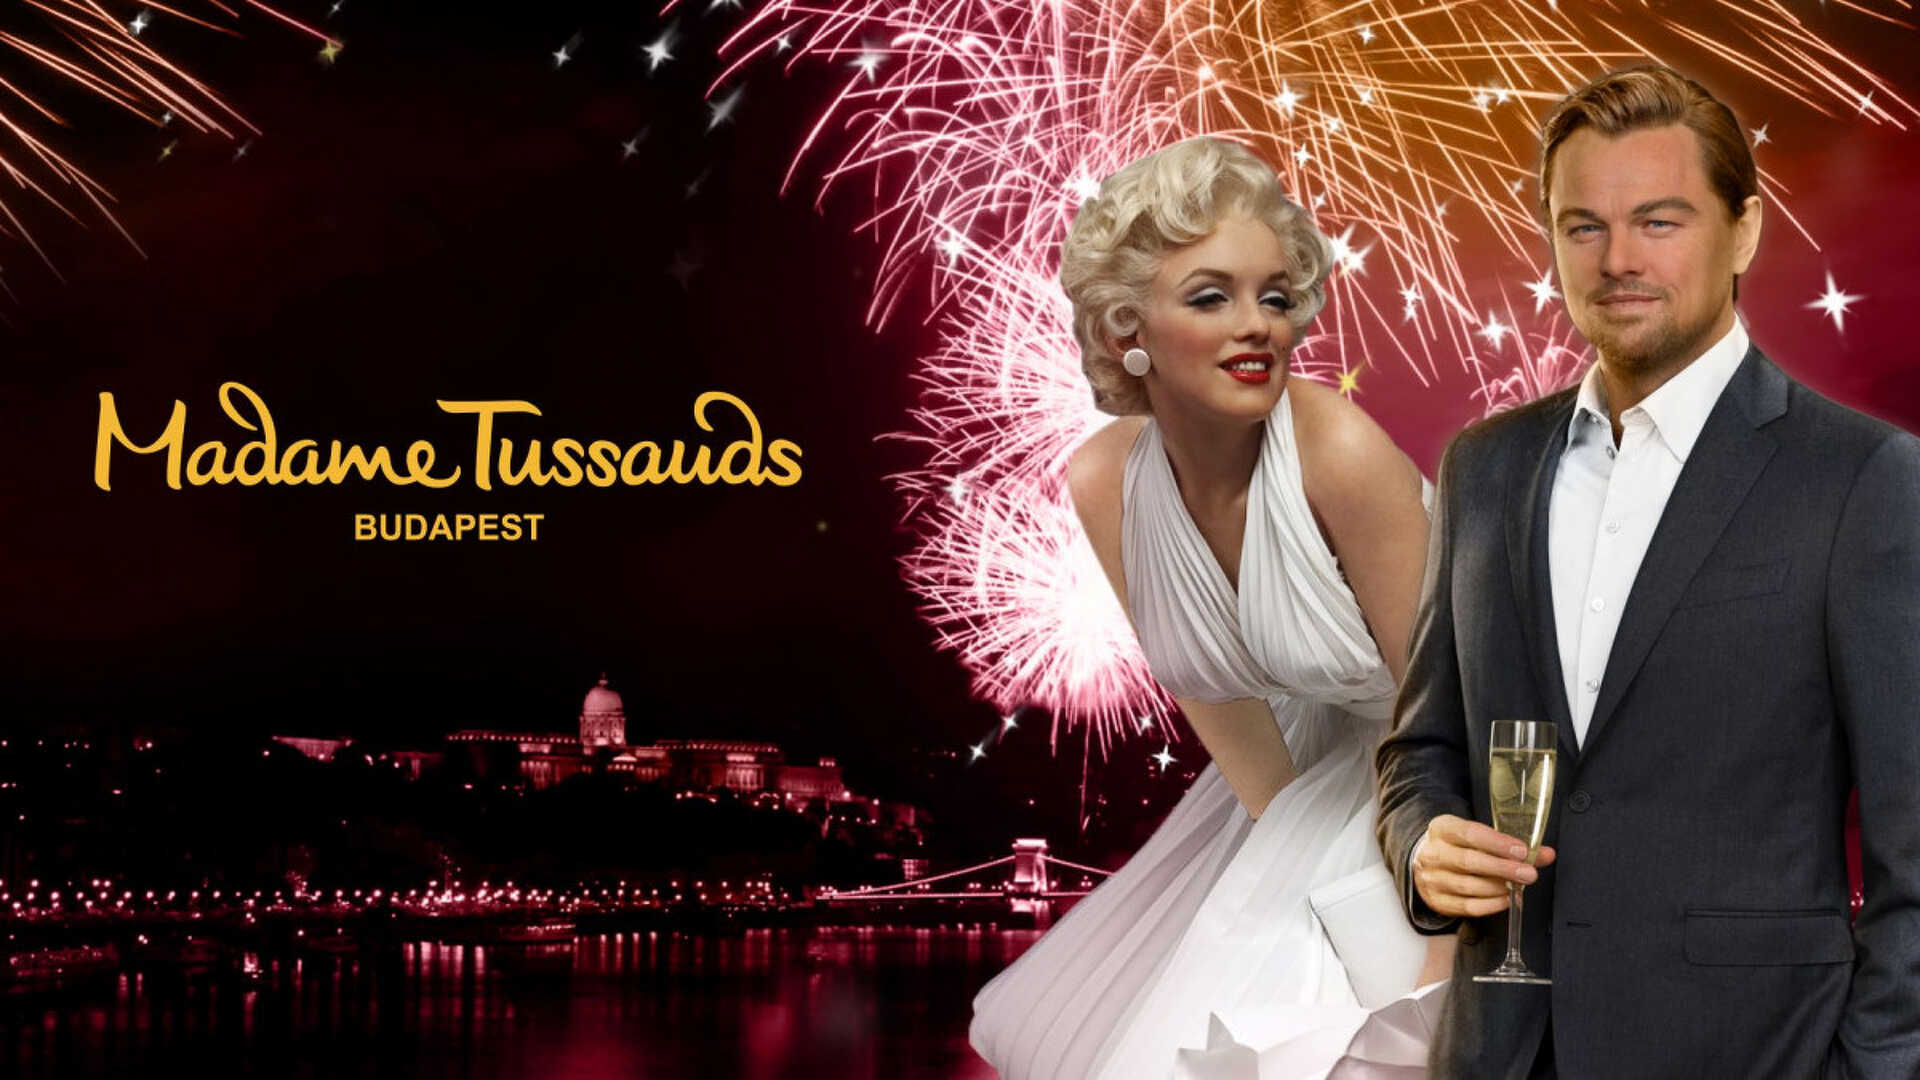 Madame Tussauds Opens Today in Budapest